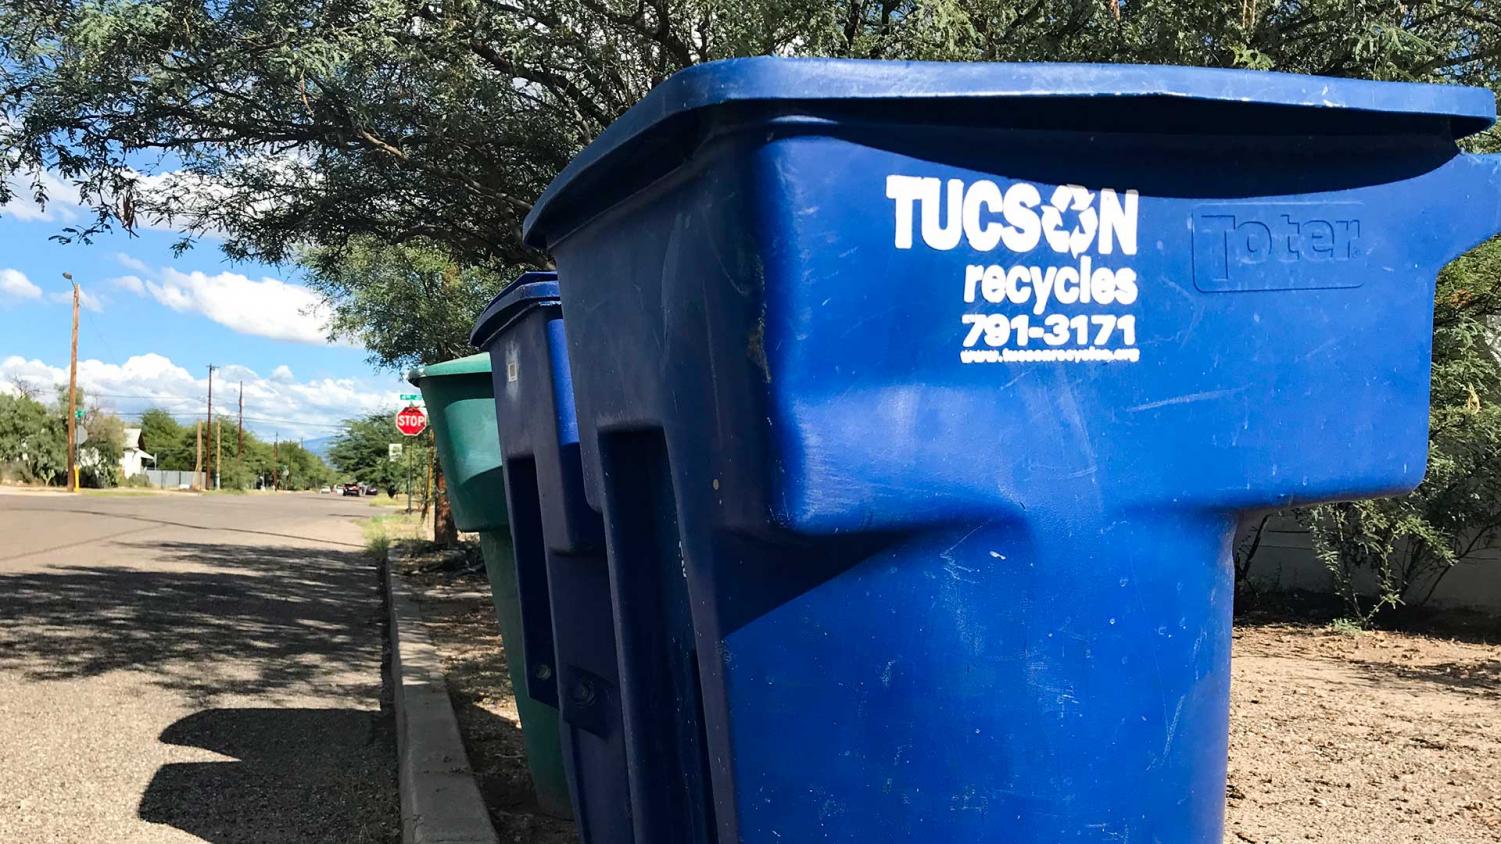 Tucson Recycling Schedule Changes to Biweekly The Paper Cut